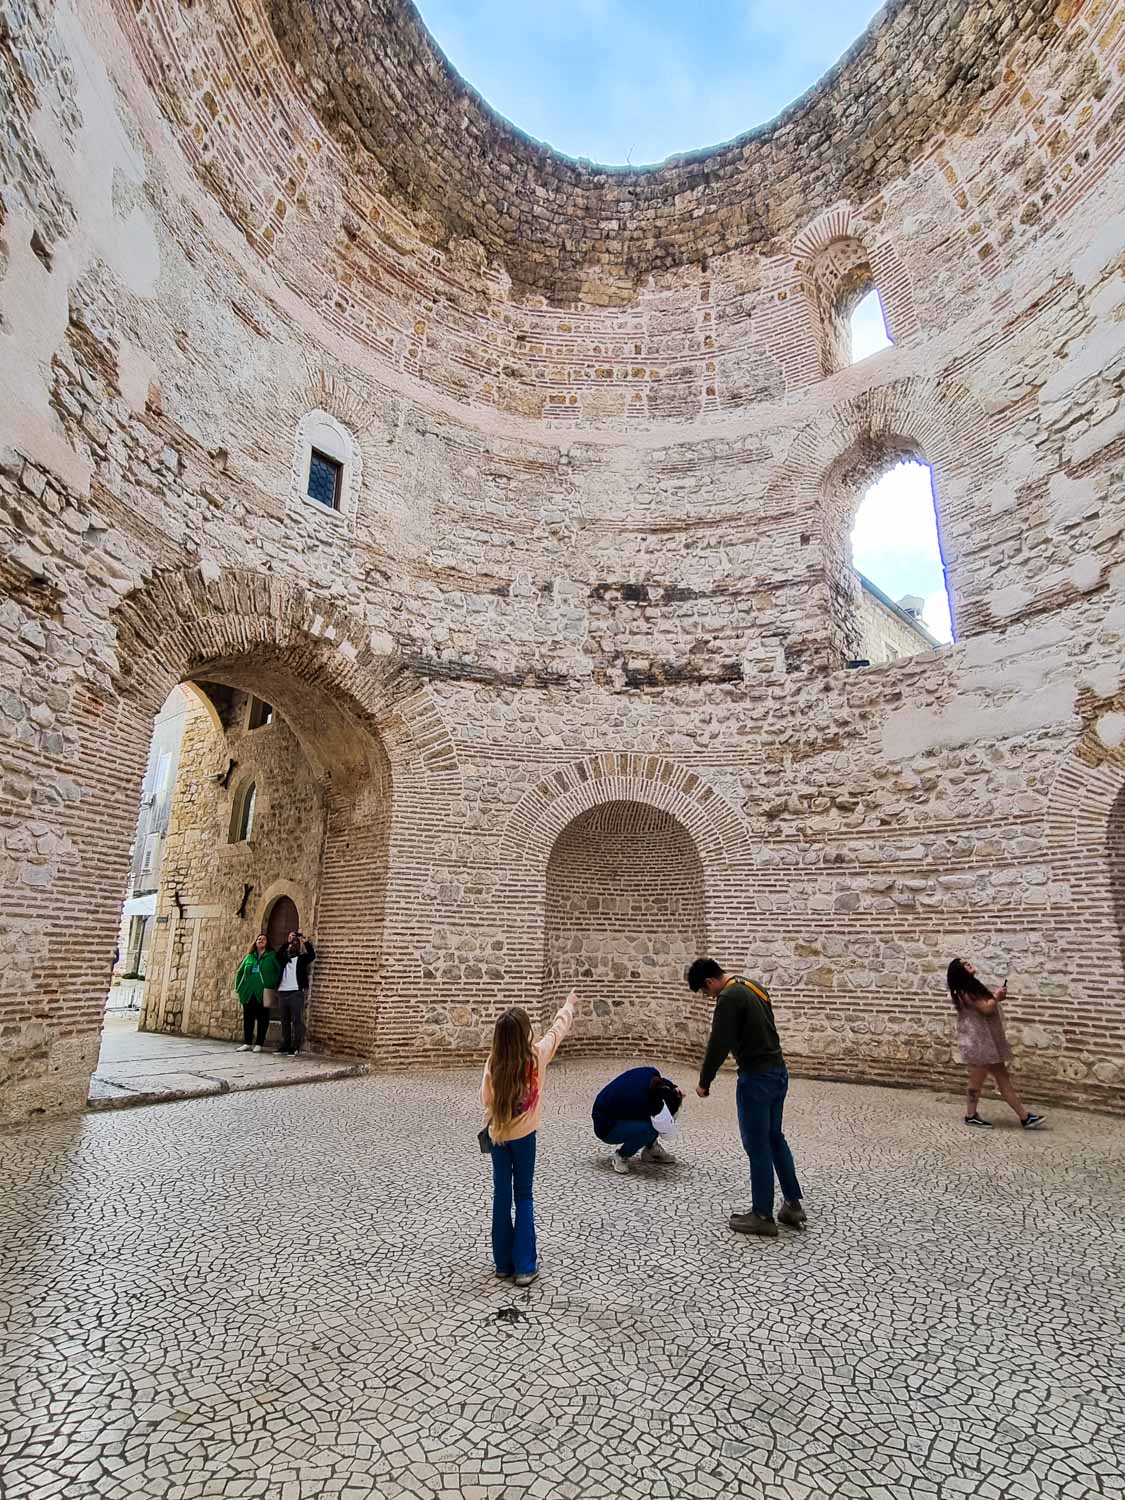 My daughter points up to the hole in the roof of the Vestibule, part of Diocletian's Palace and one of the best places to visit in Split with kids